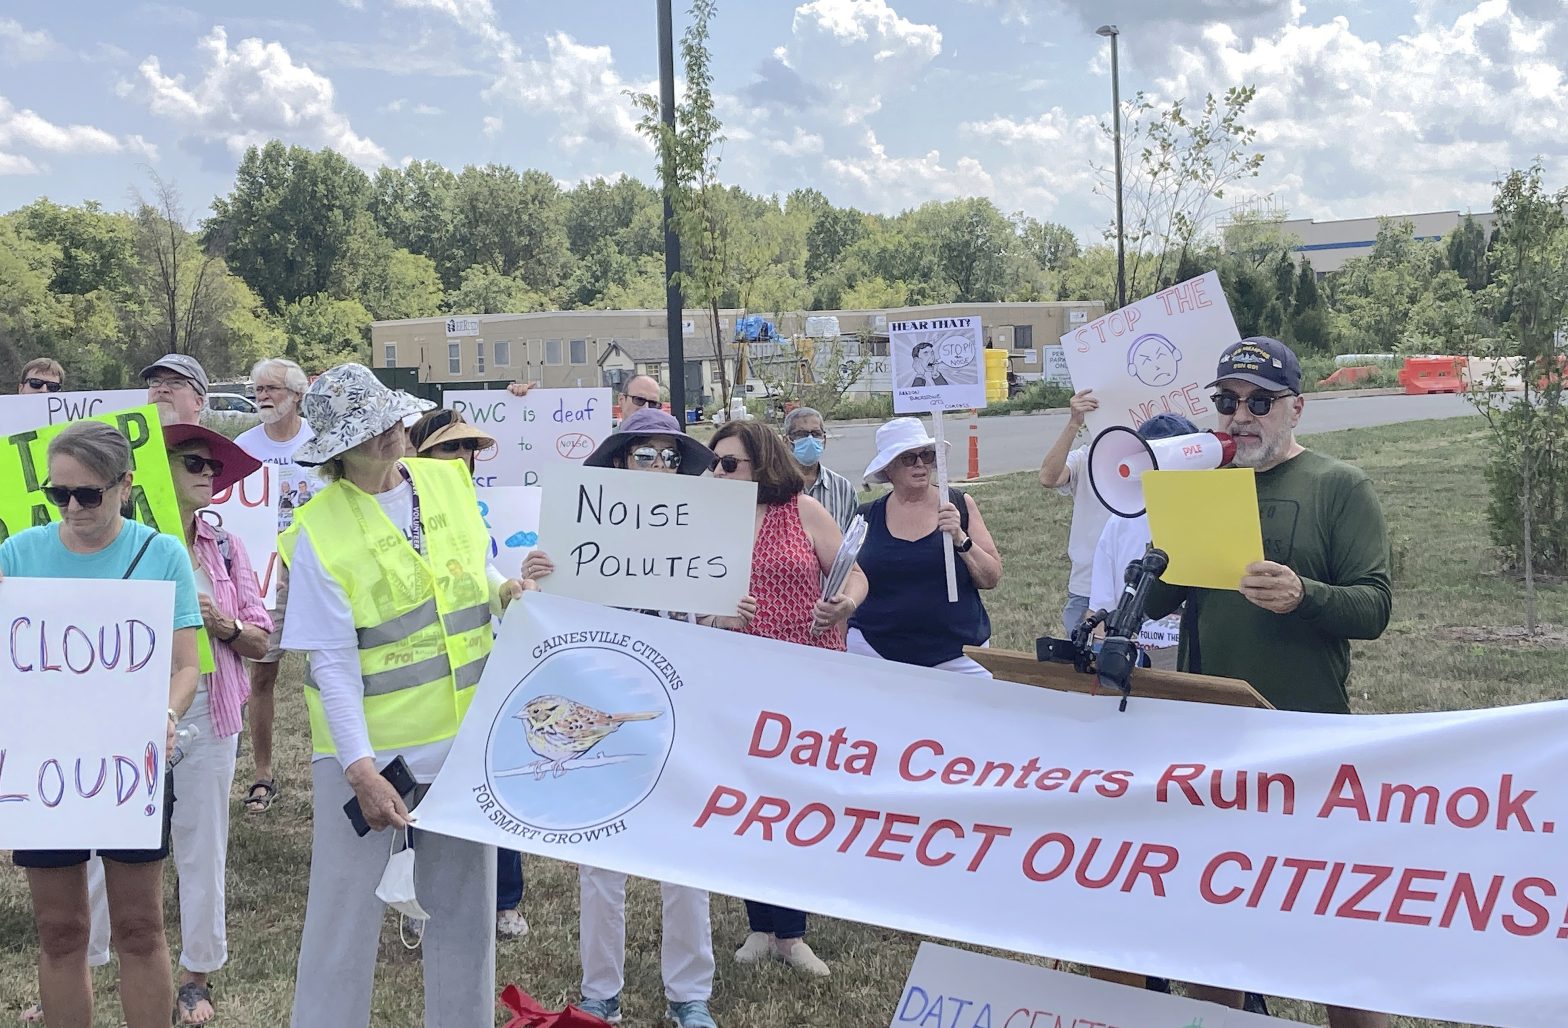 Backlash to Data Centers Prompts Political Upset in Northern Virginia